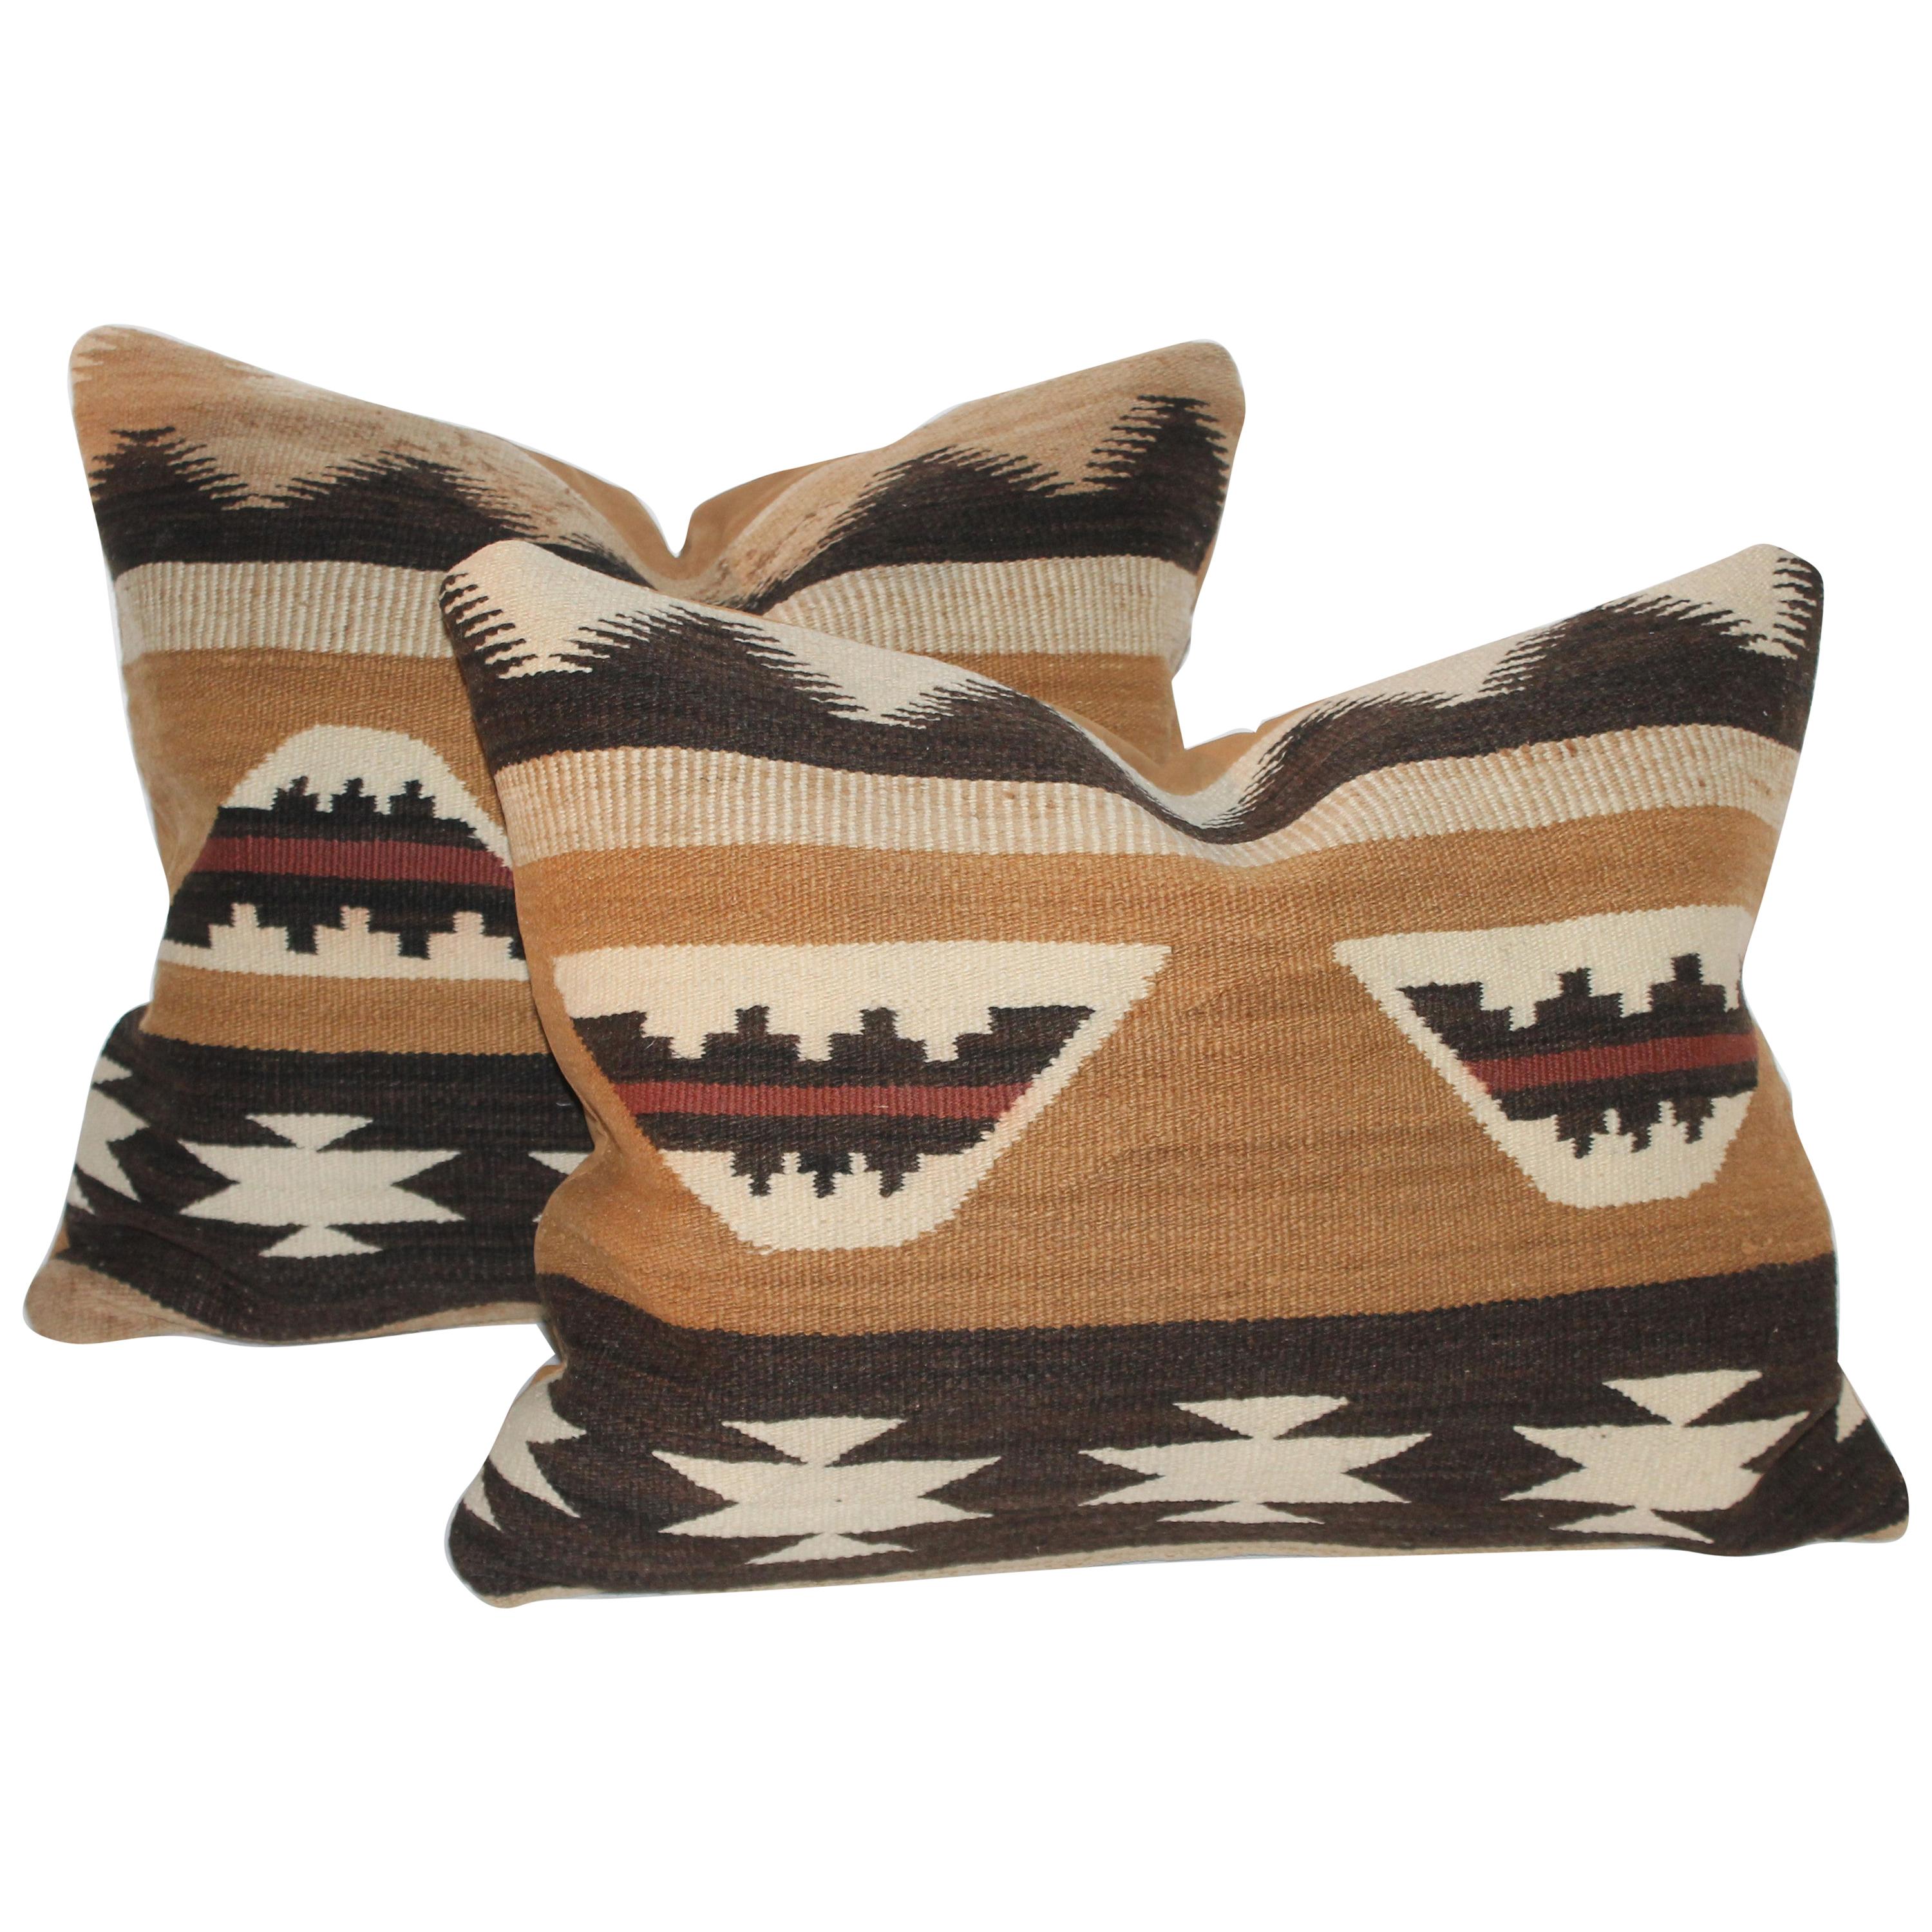 Early Navajo Chinle Indian Weaving Pillows